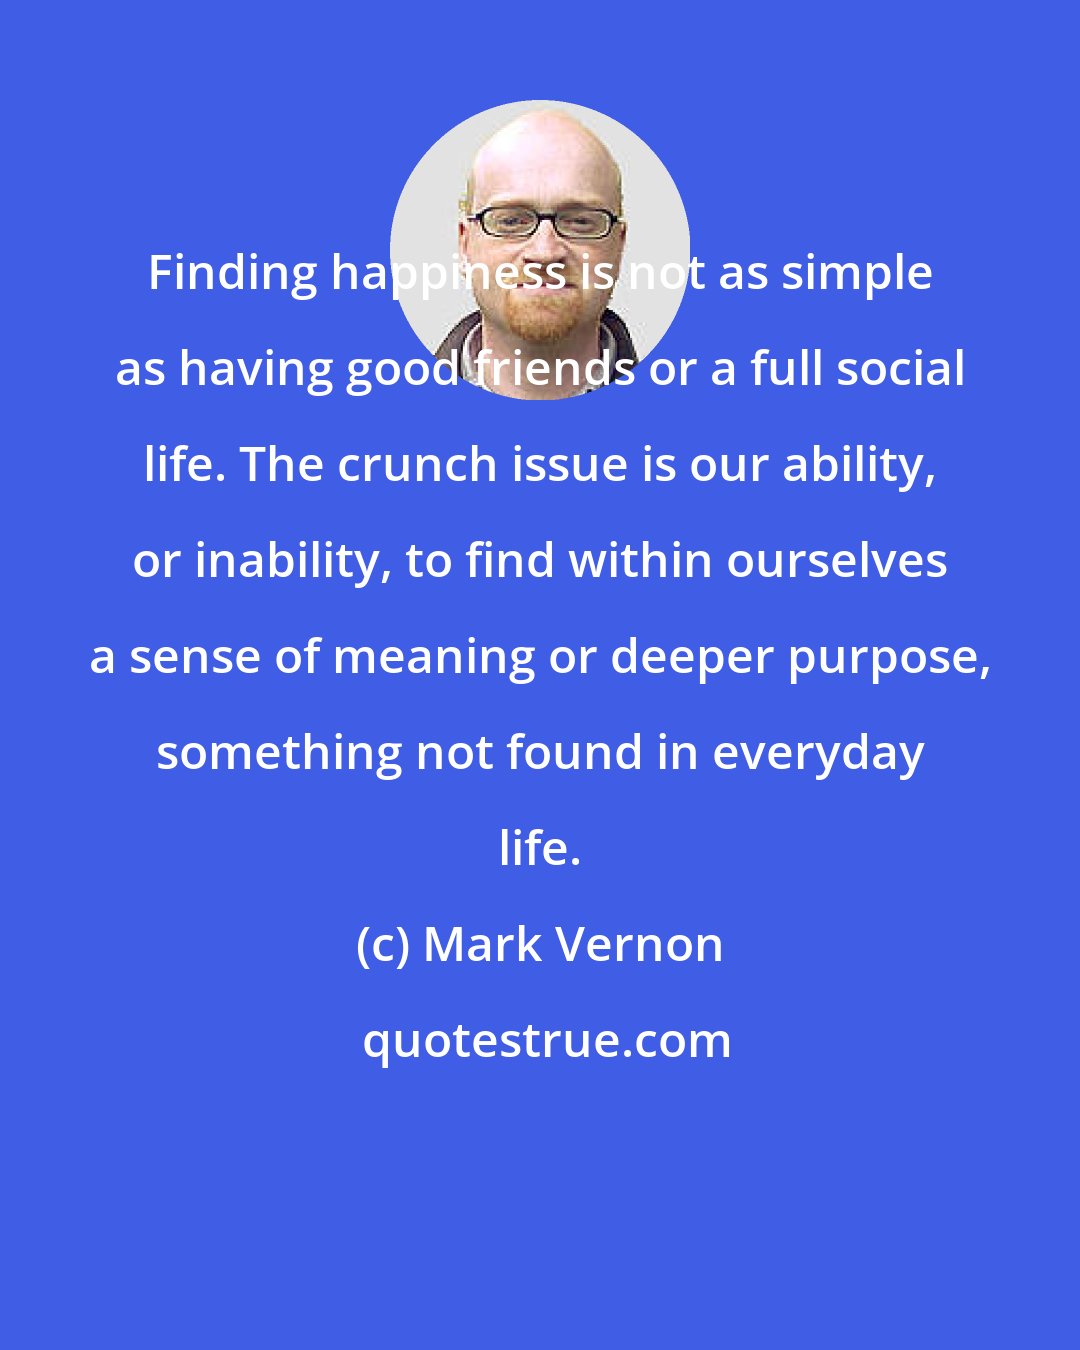 Mark Vernon: Finding happiness is not as simple as having good friends or a full social life. The crunch issue is our ability, or inability, to find within ourselves a sense of meaning or deeper purpose, something not found in everyday life.